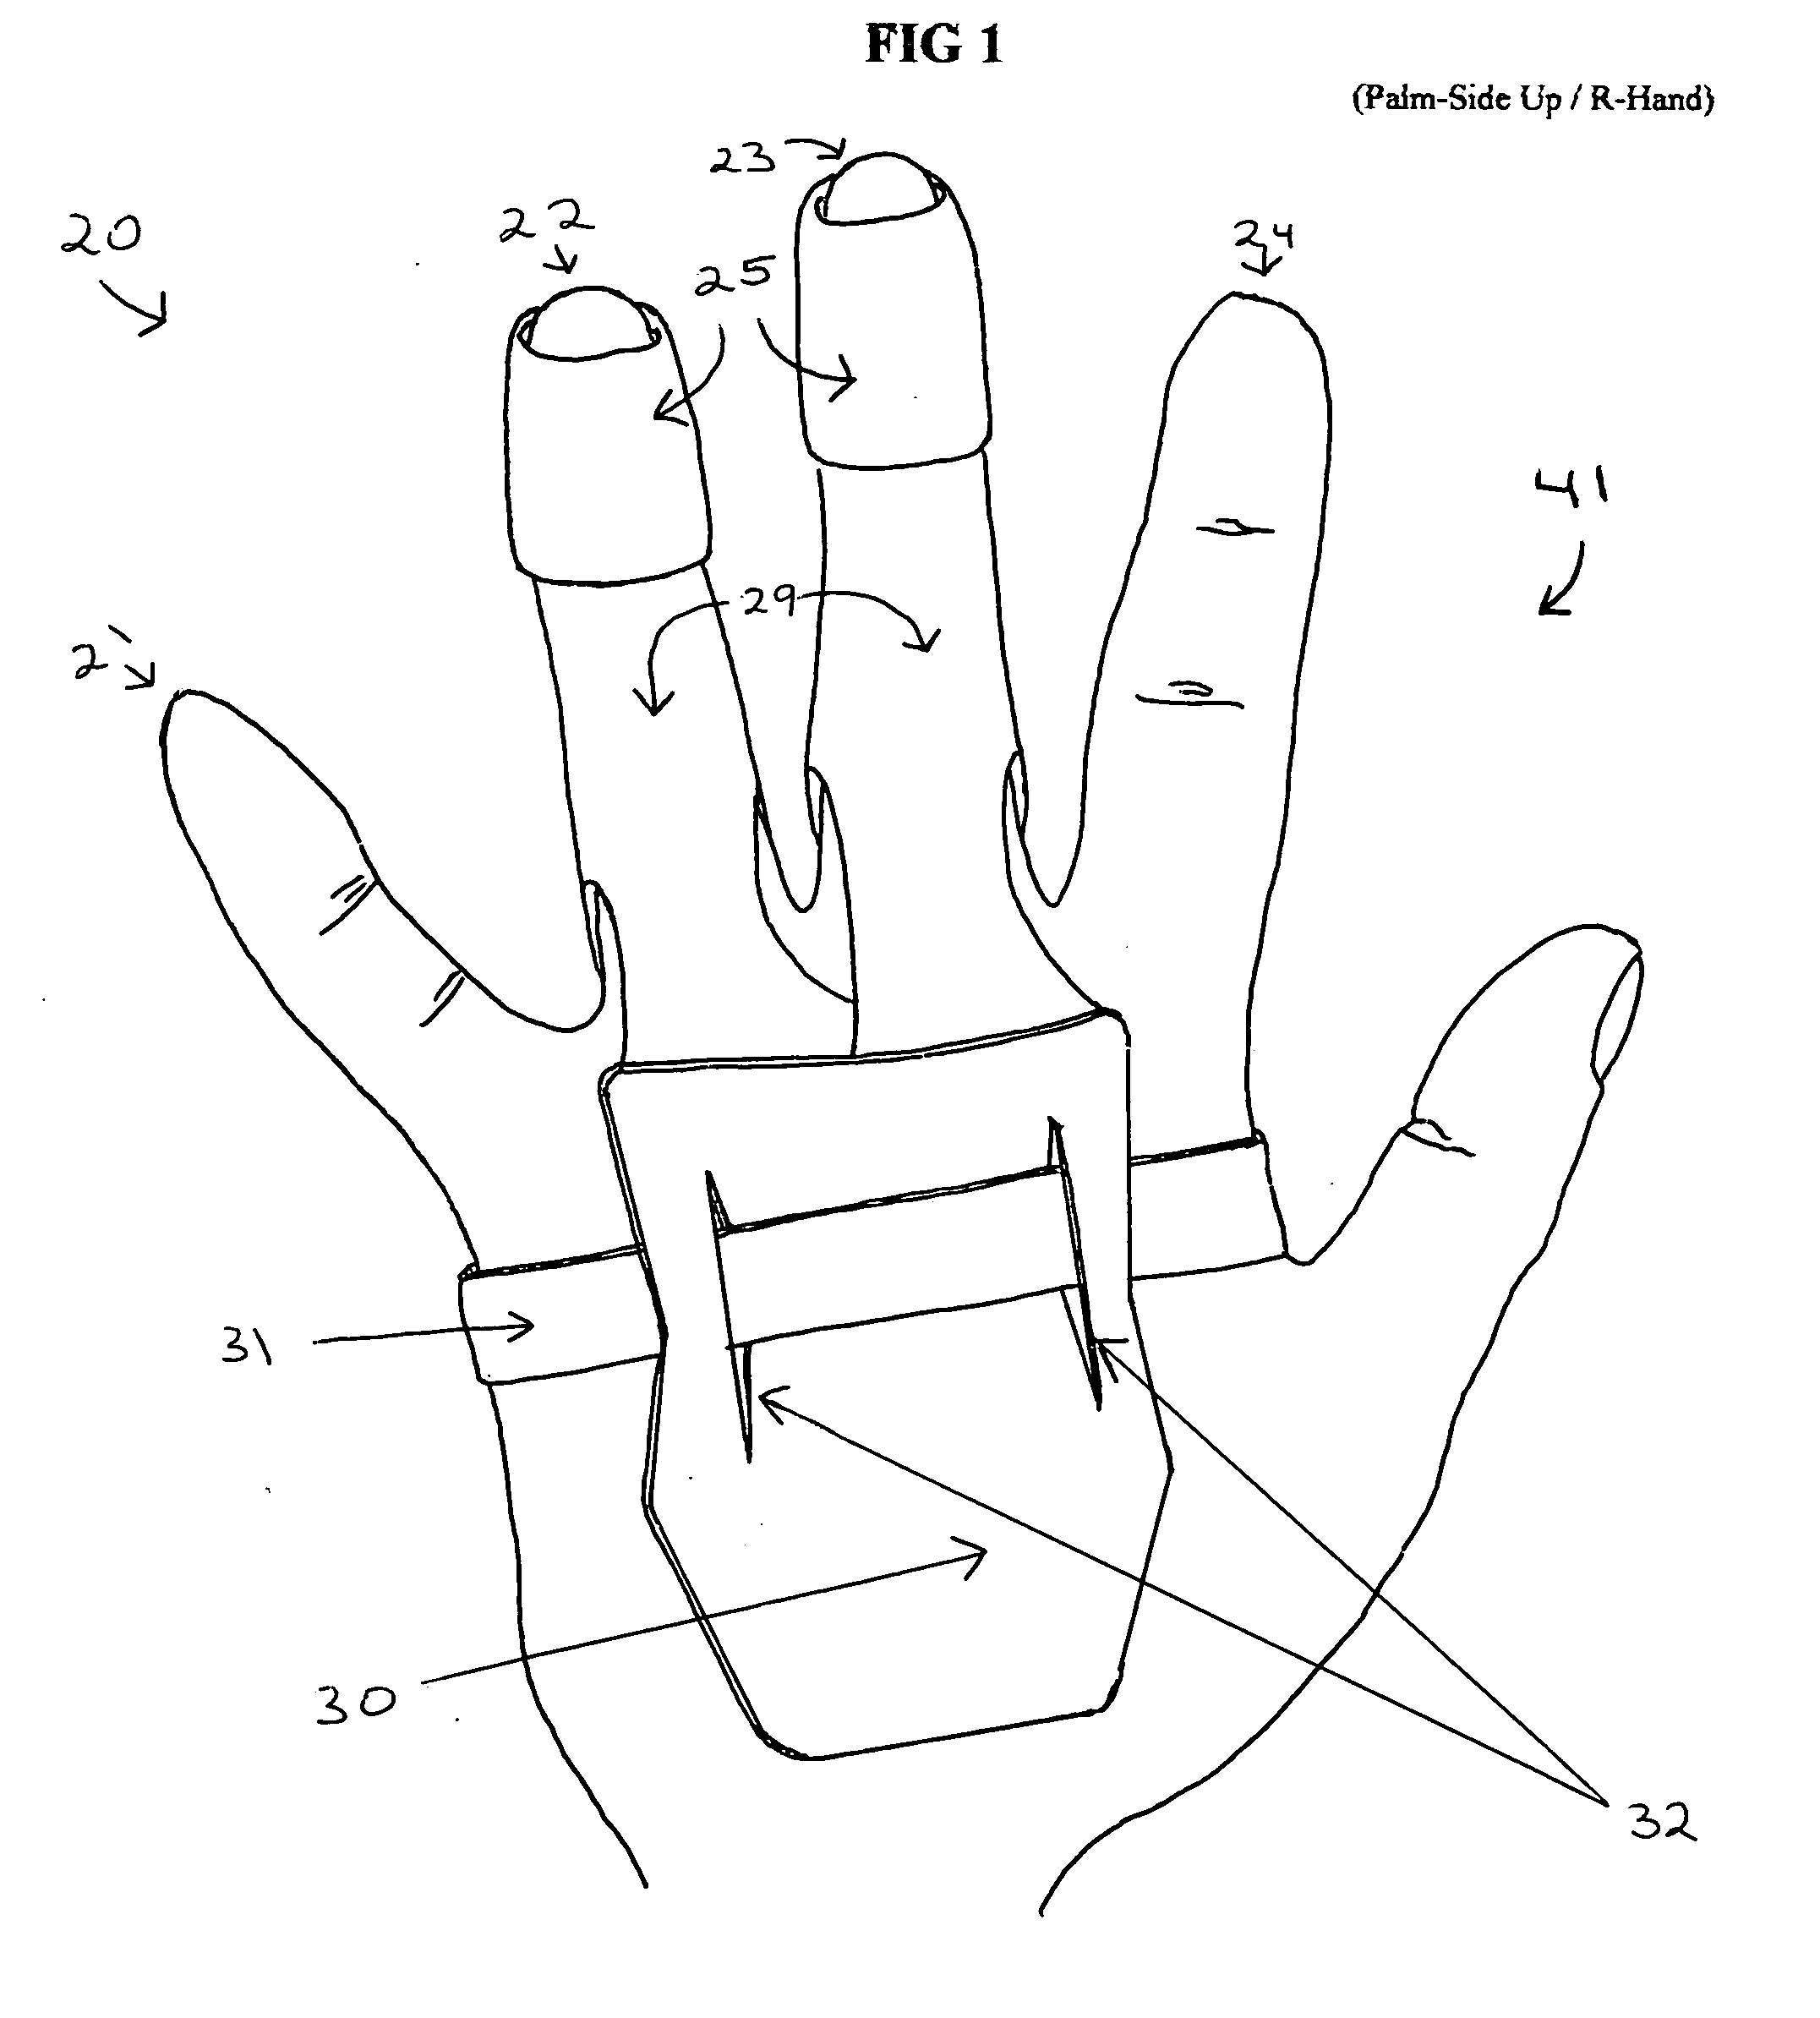 Functional control / grip-enhanced sports glove for bowling